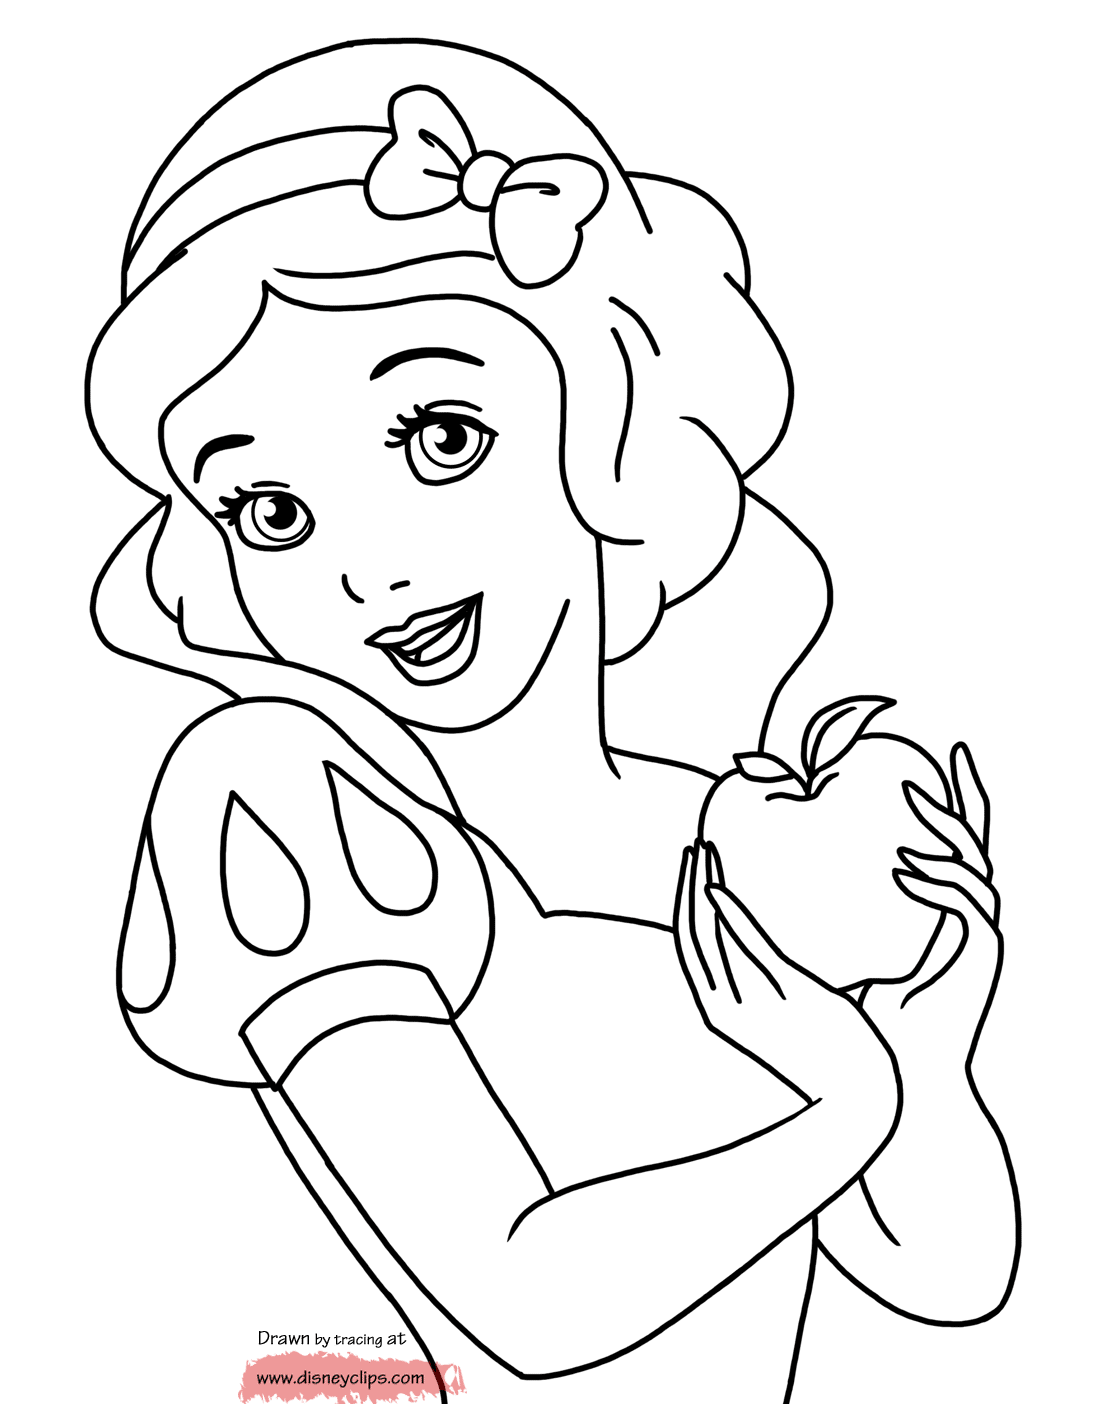 snow white coloring snow white coloring pages best coloring pages for kids white snow coloring 1 2